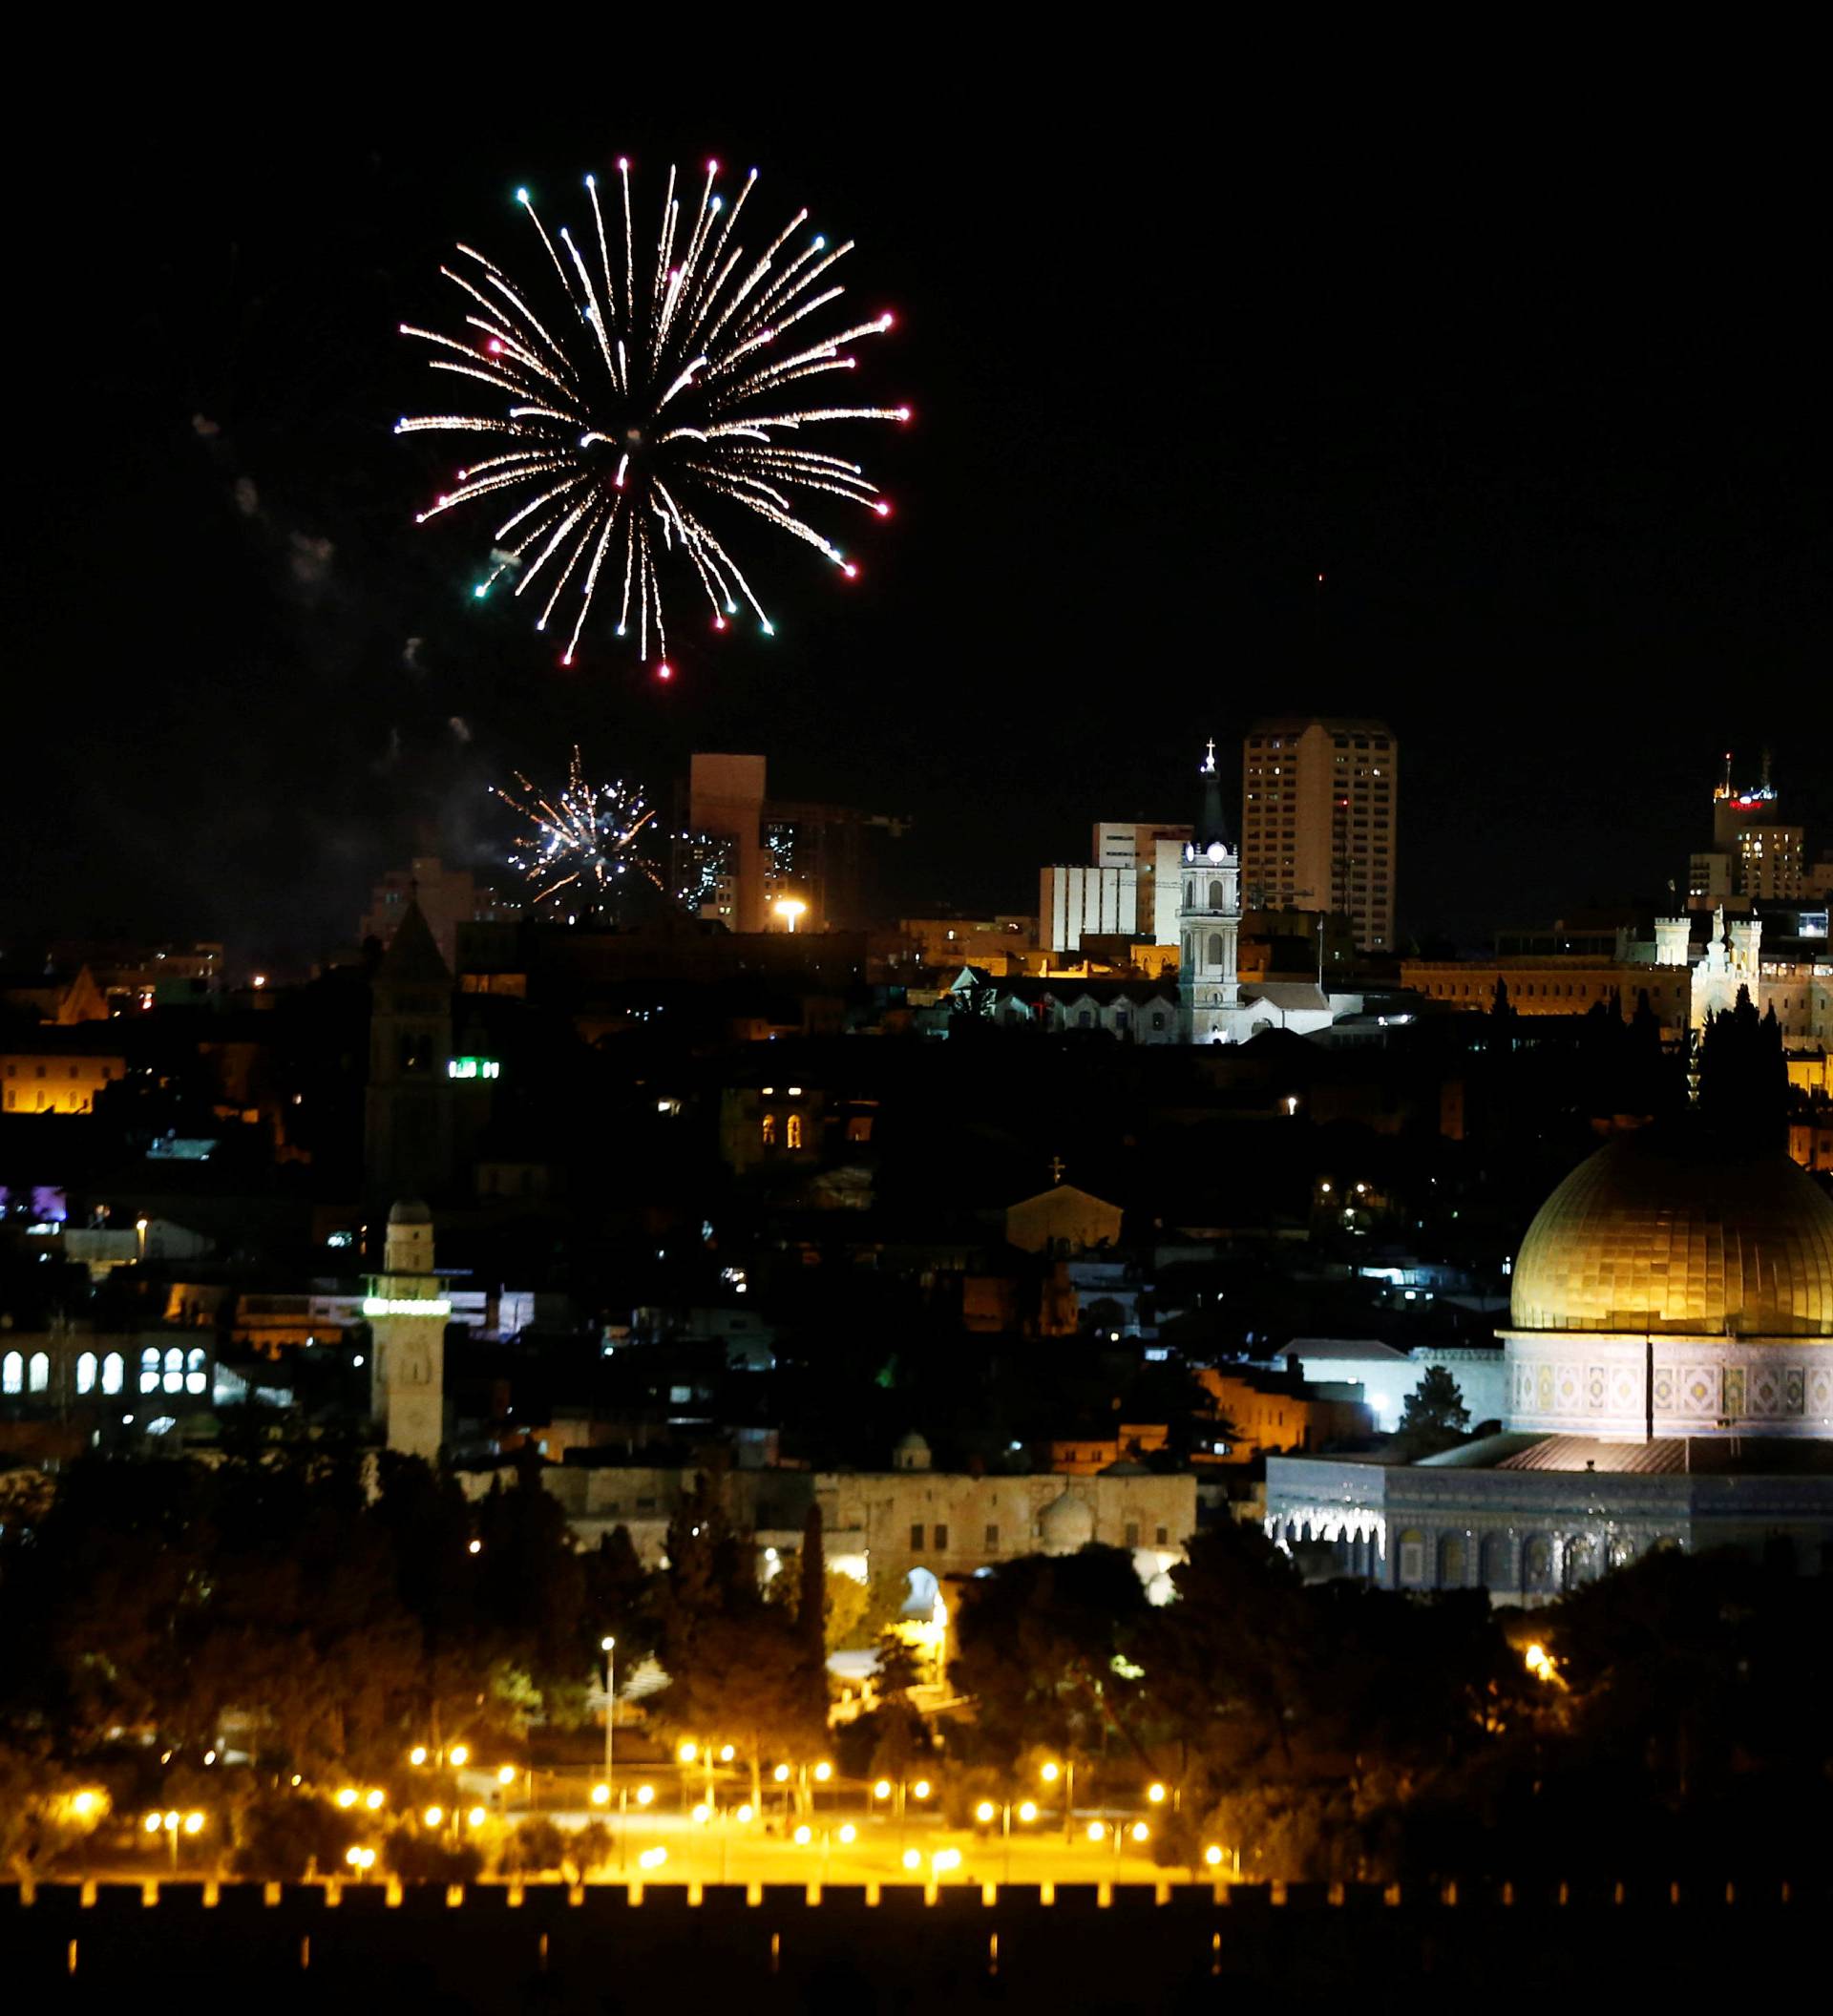 Fireworks explode near Jerusalem's Old City during celebrations for Israel's Independence Day marking the 68th anniversary of the creation of the state